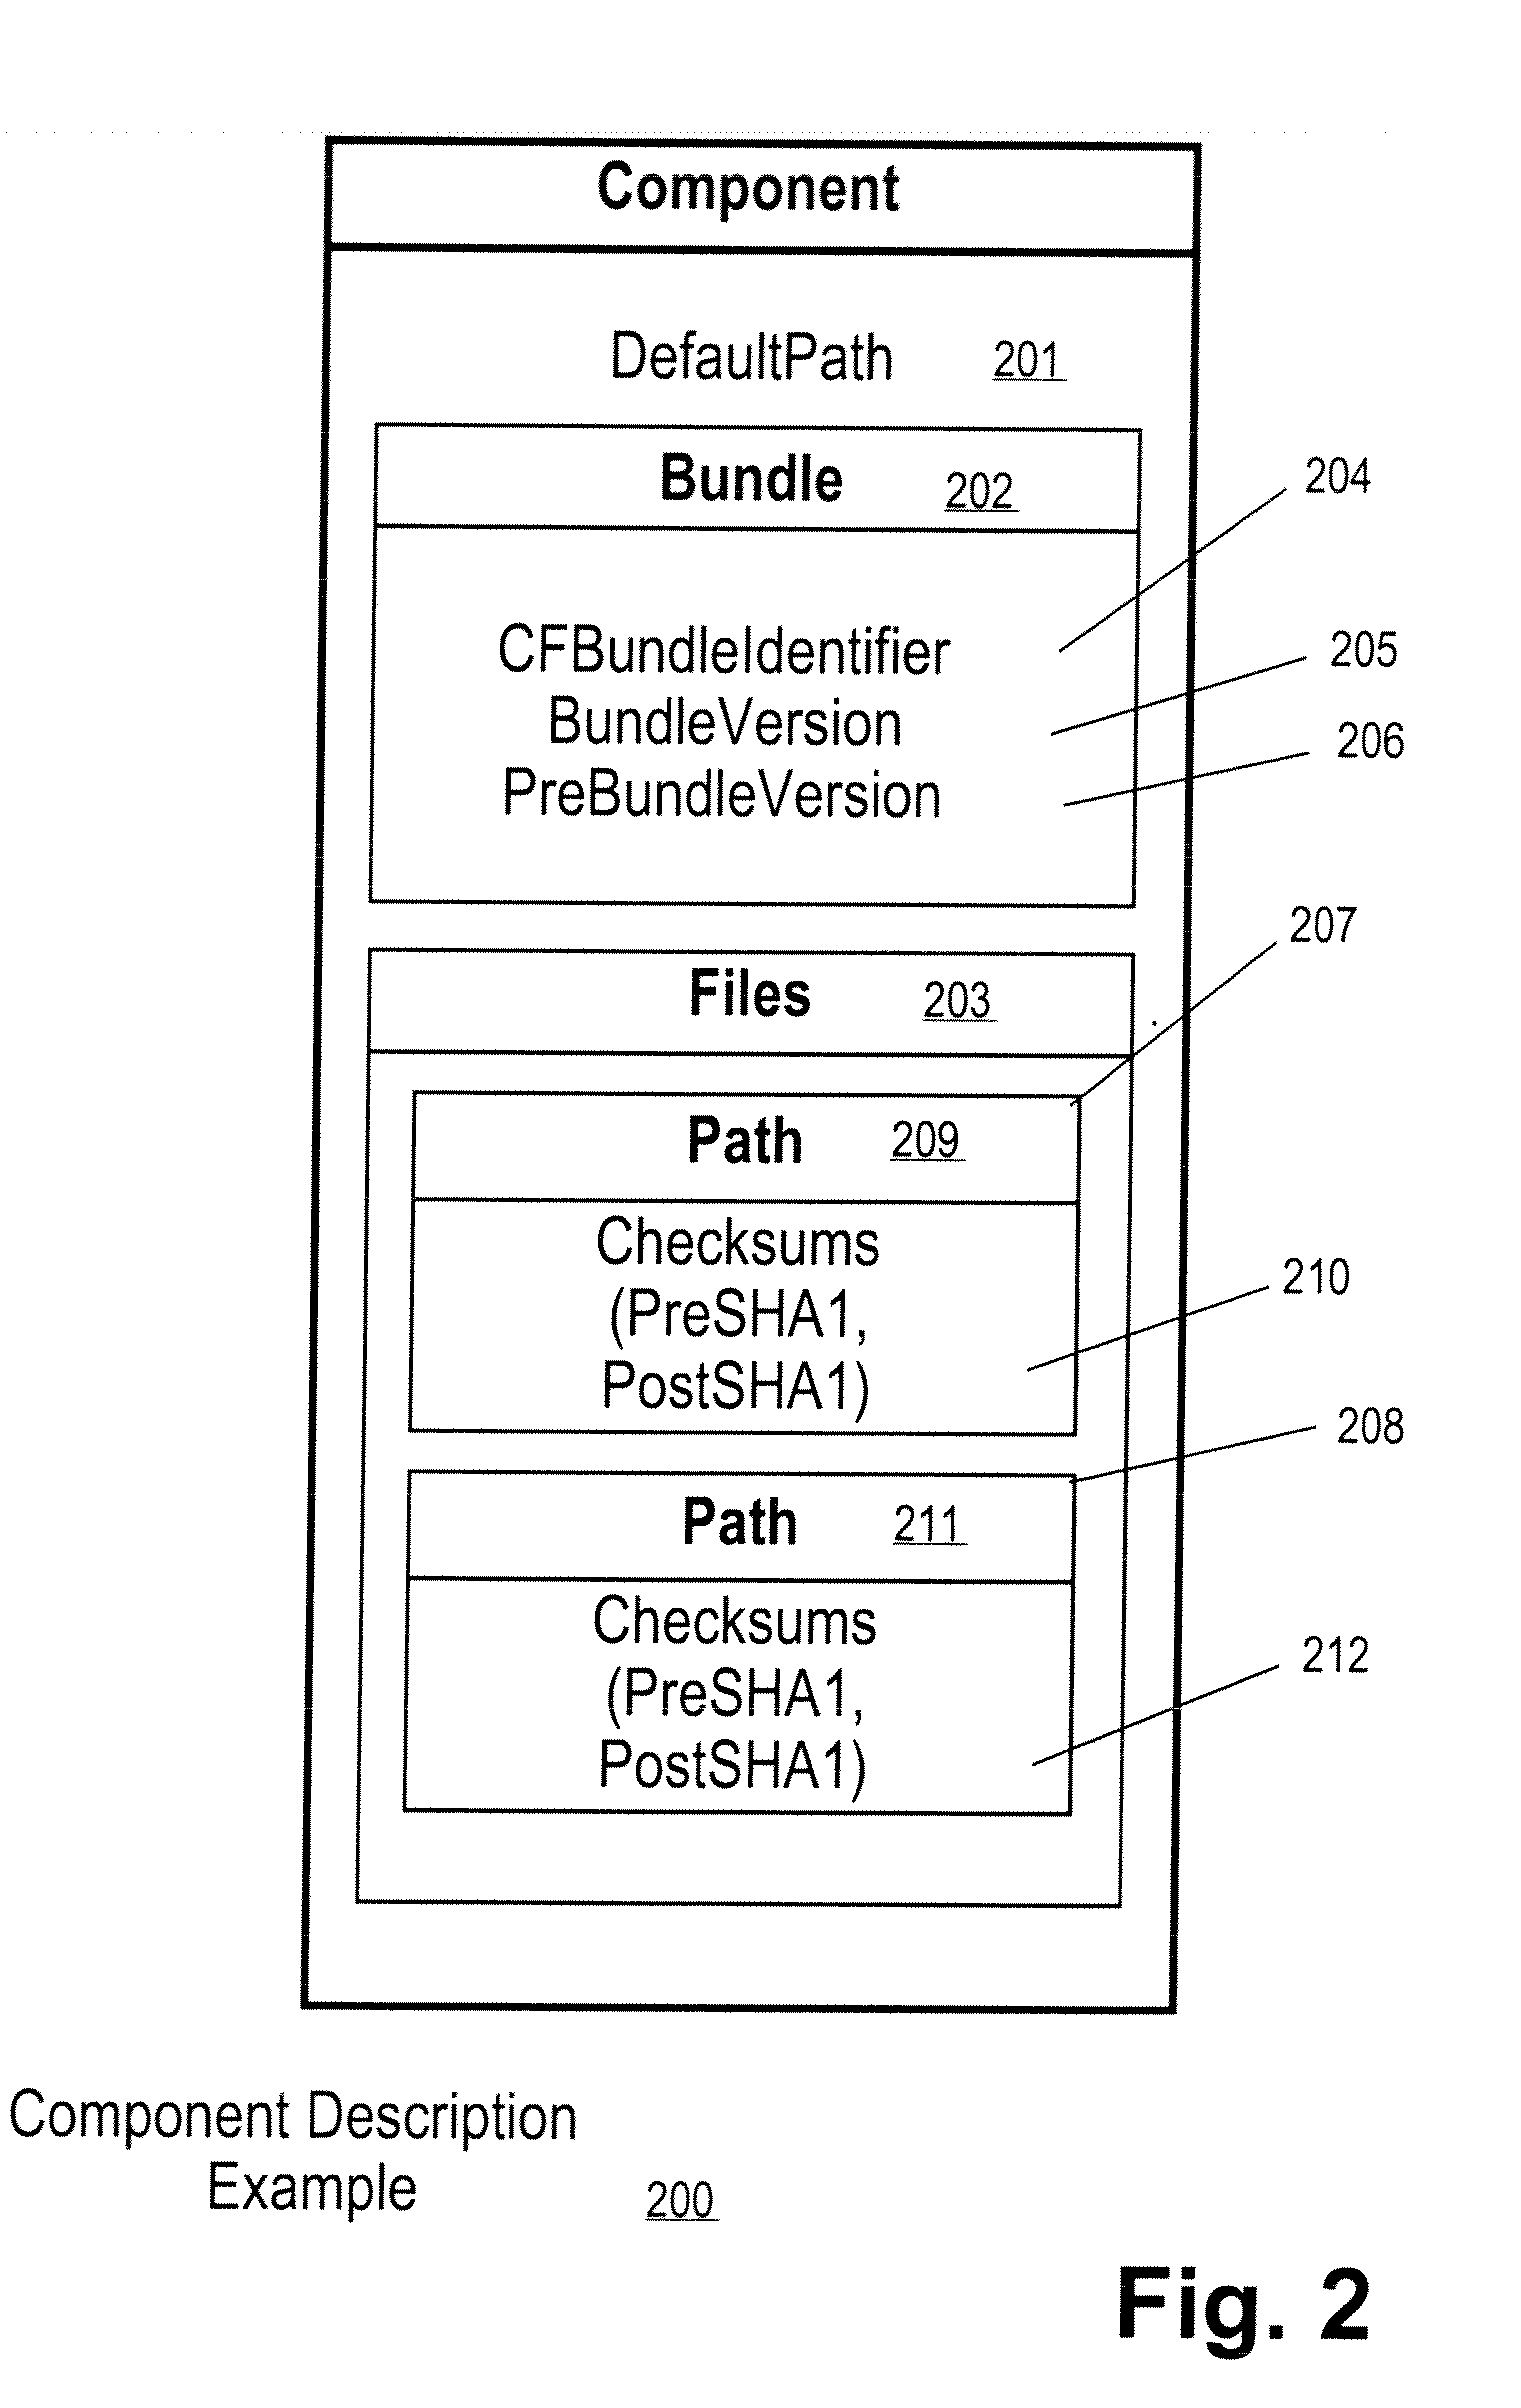 Mechanism for determining applicability of software packages for installation